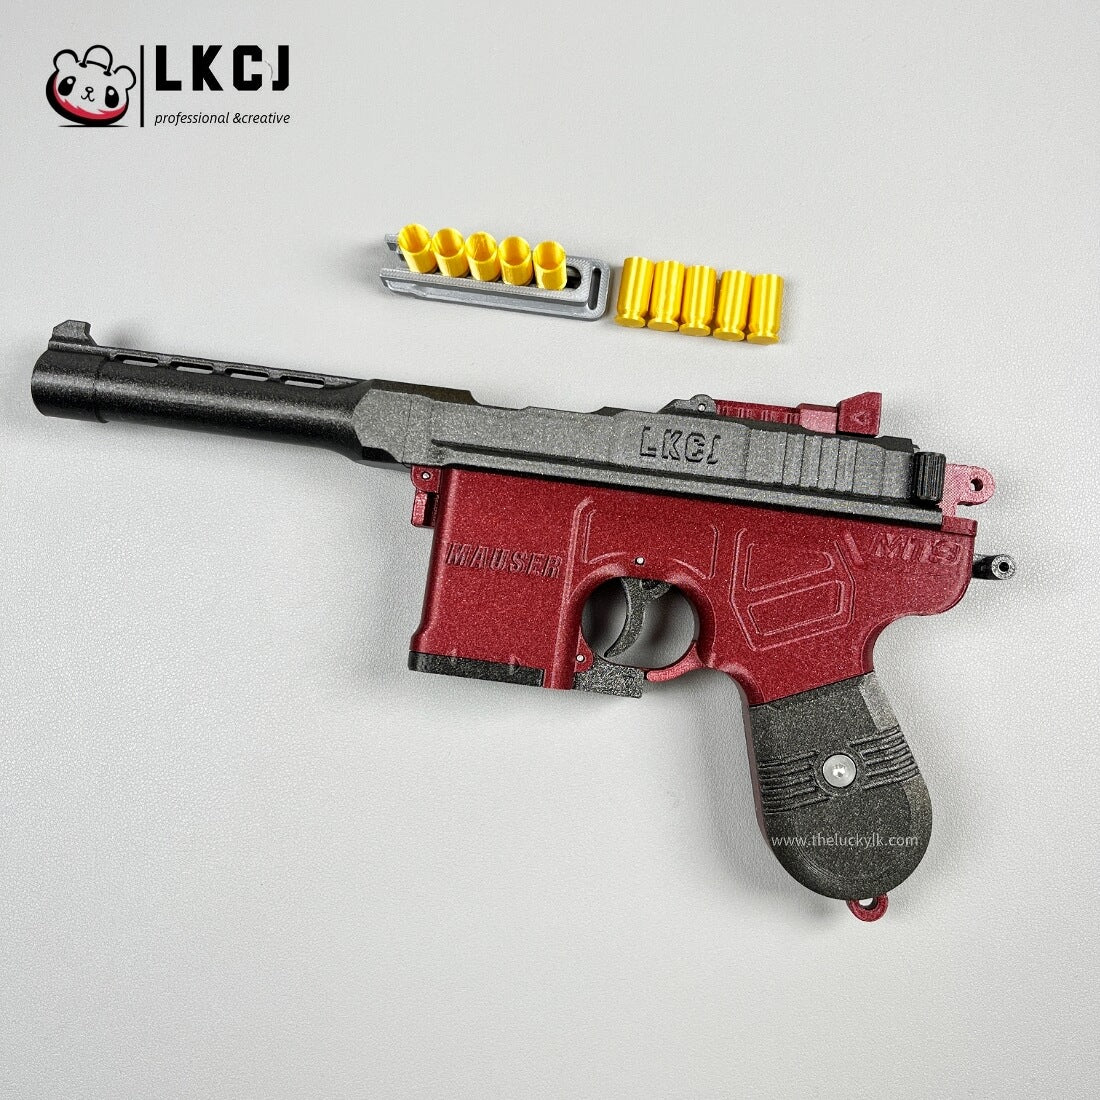 3D Printed Mauser With Throwable Bullets LKCJ